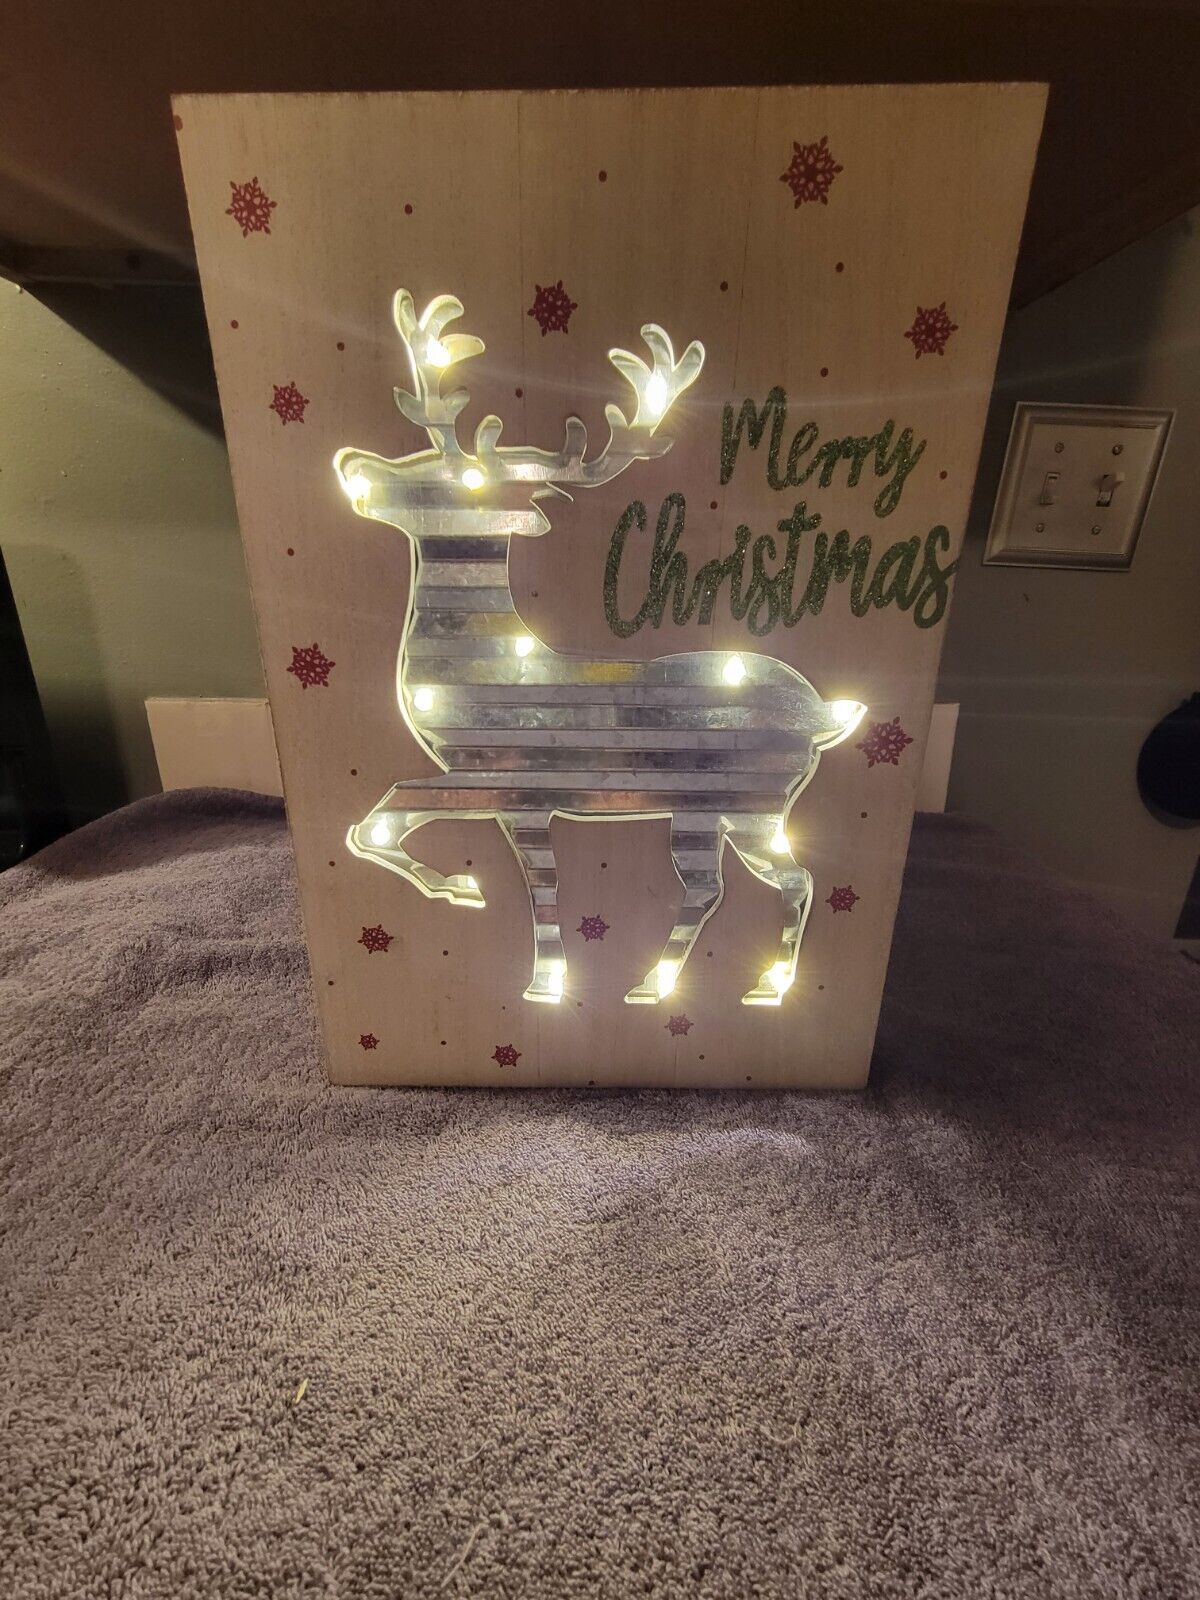 Merry Christmas Sign with Corrugated Metal Reindeer. LIGHTS UP